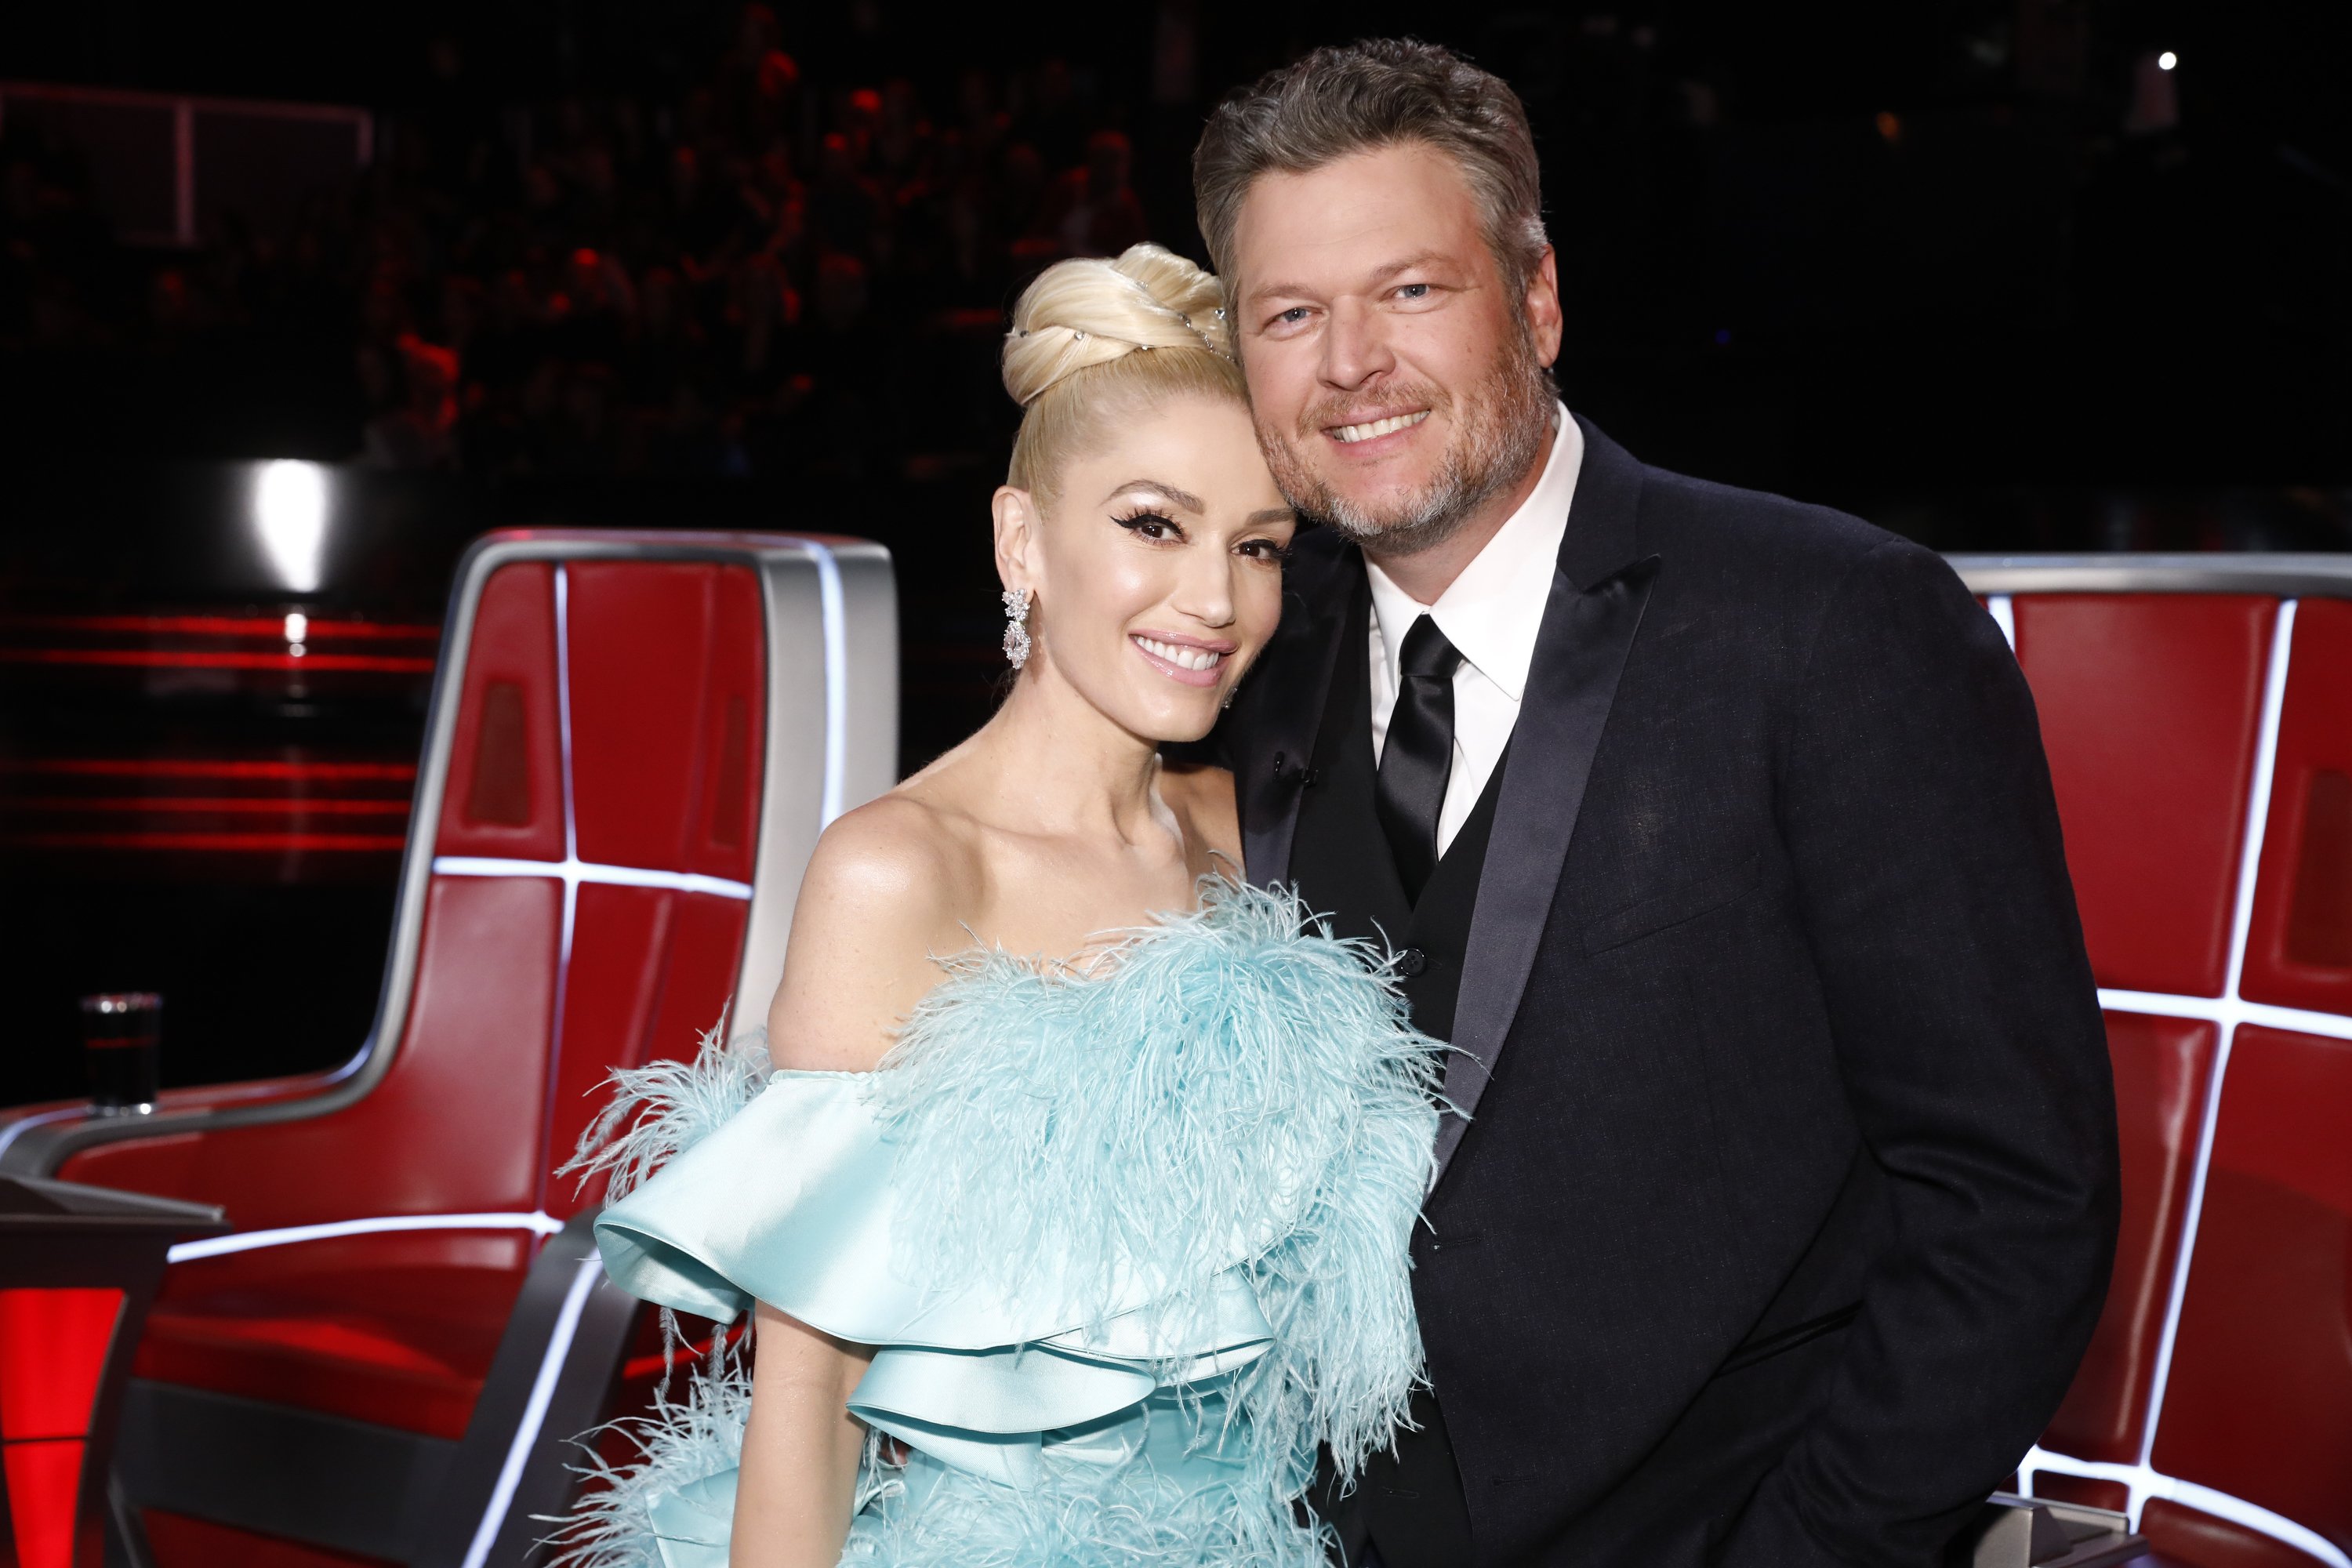 Blake Shelton and Gwen Stefani as coaches on Season 17 of "The Voice." | Source: Getty Images.